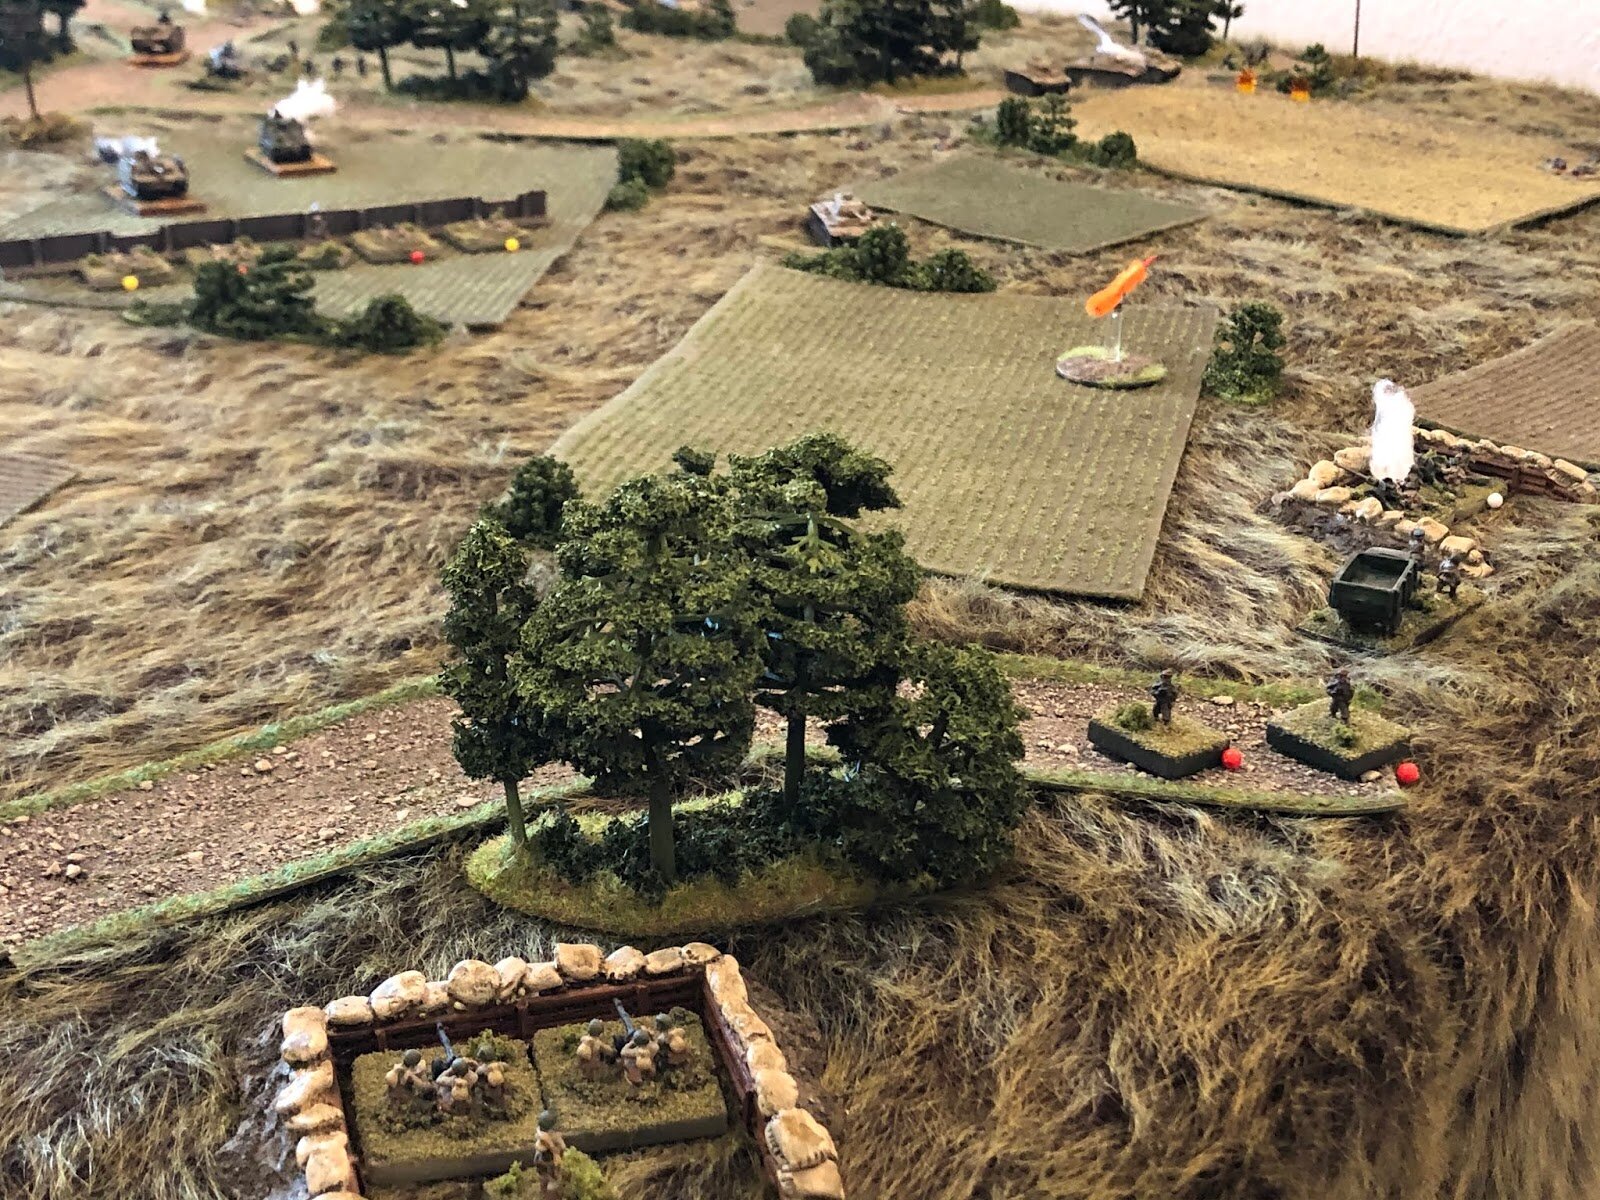 And as the ATG gunners are running (far right bottom), the Soviet MG Platoon (bottom left) continues firing on the remnants of the German 2nd Company's assault force (top right)...